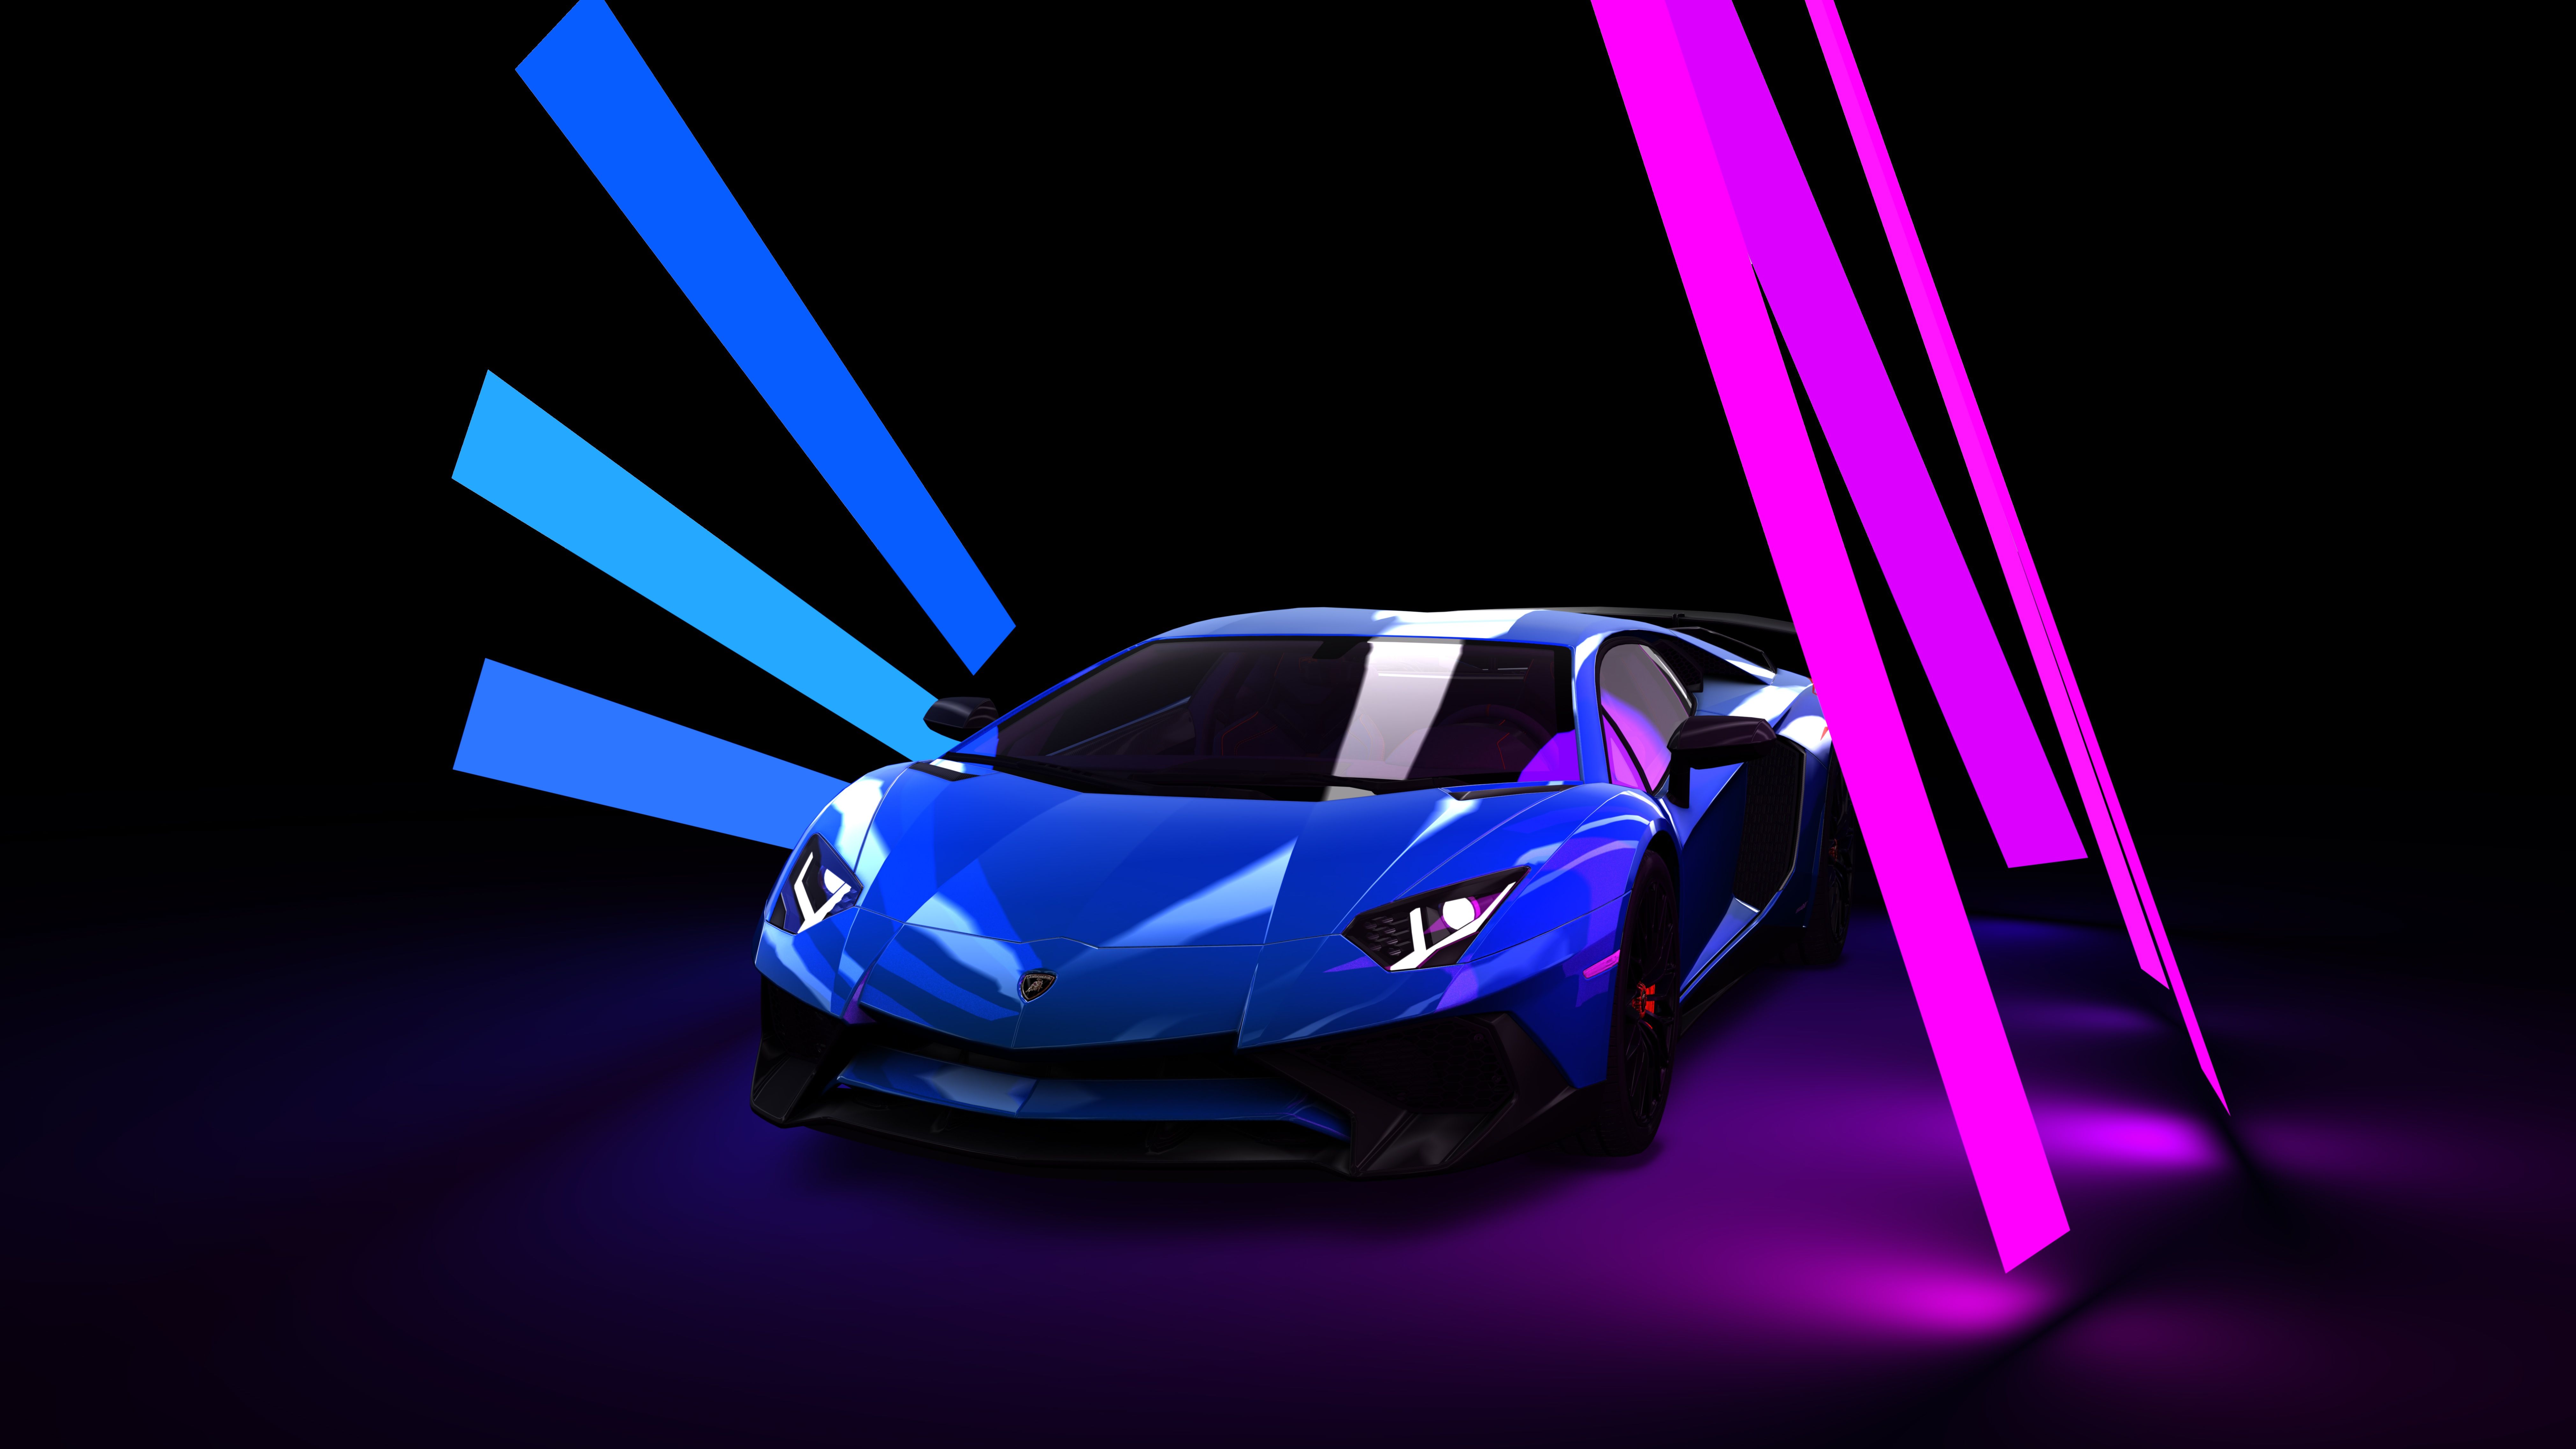 Lamborghini 4K wallpaper for your desktop or mobile screen free and easy to download